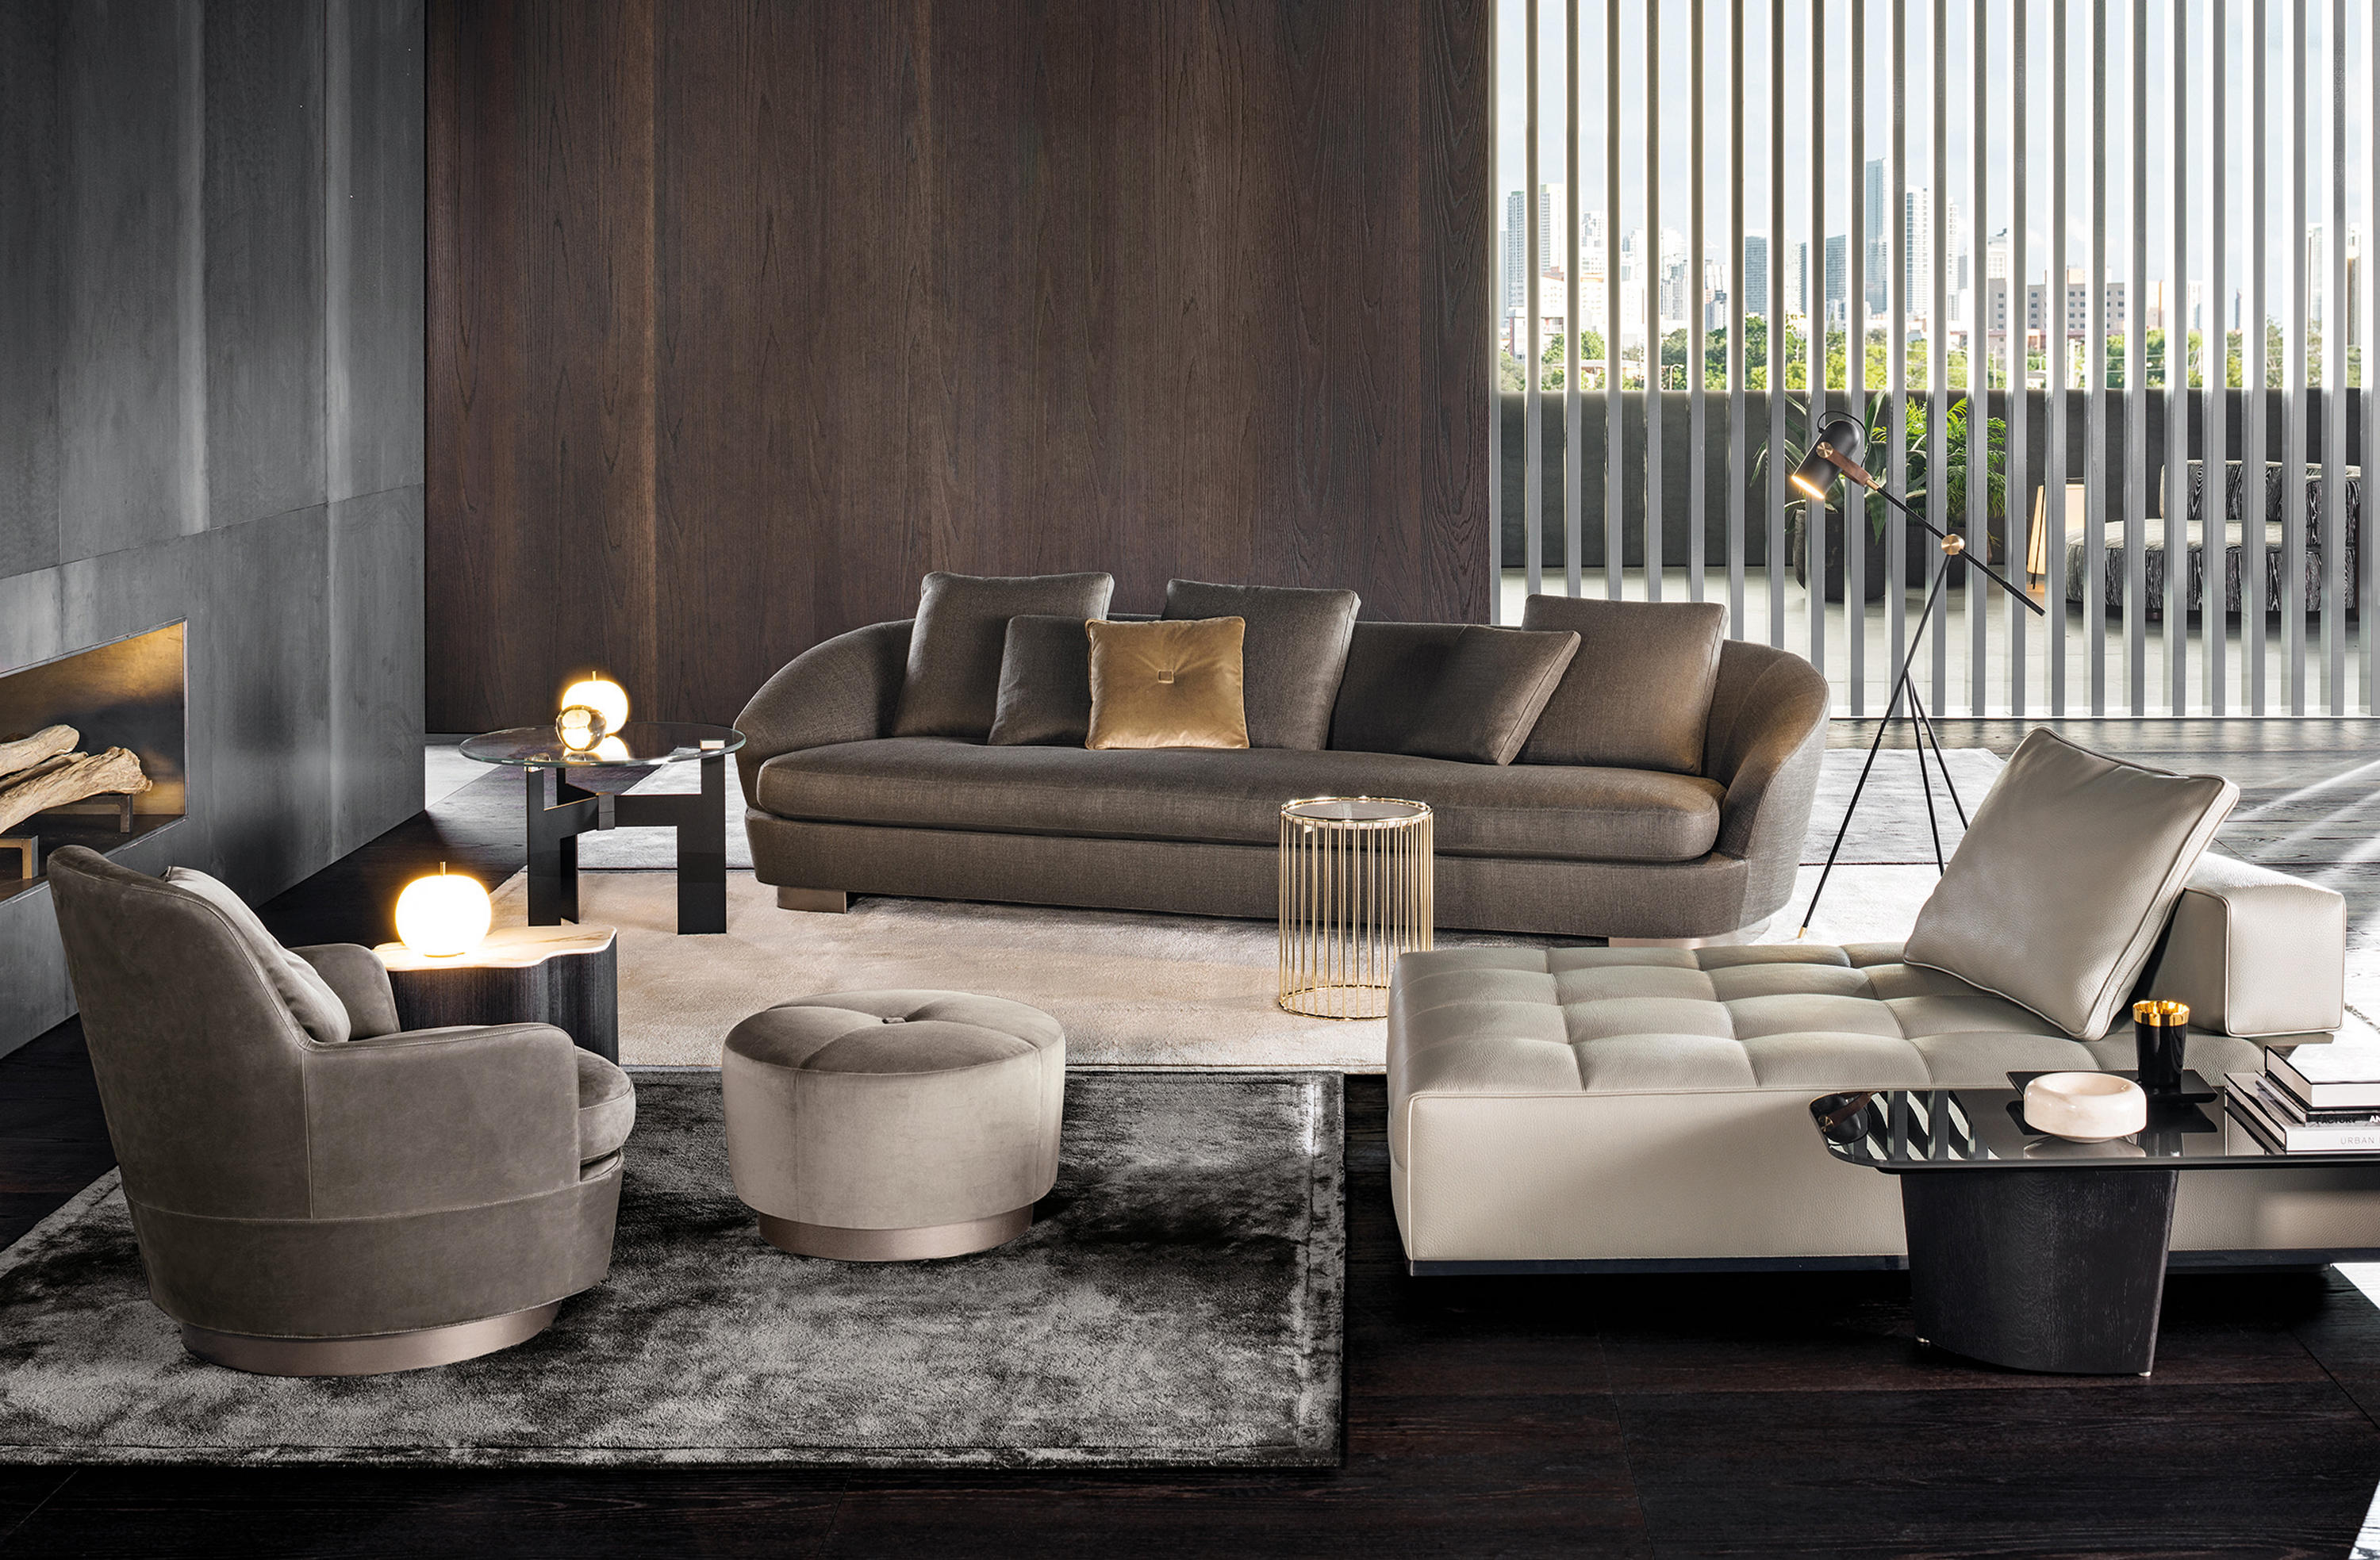 Jacques Collection by Rodolfo Dordoni for Minotti